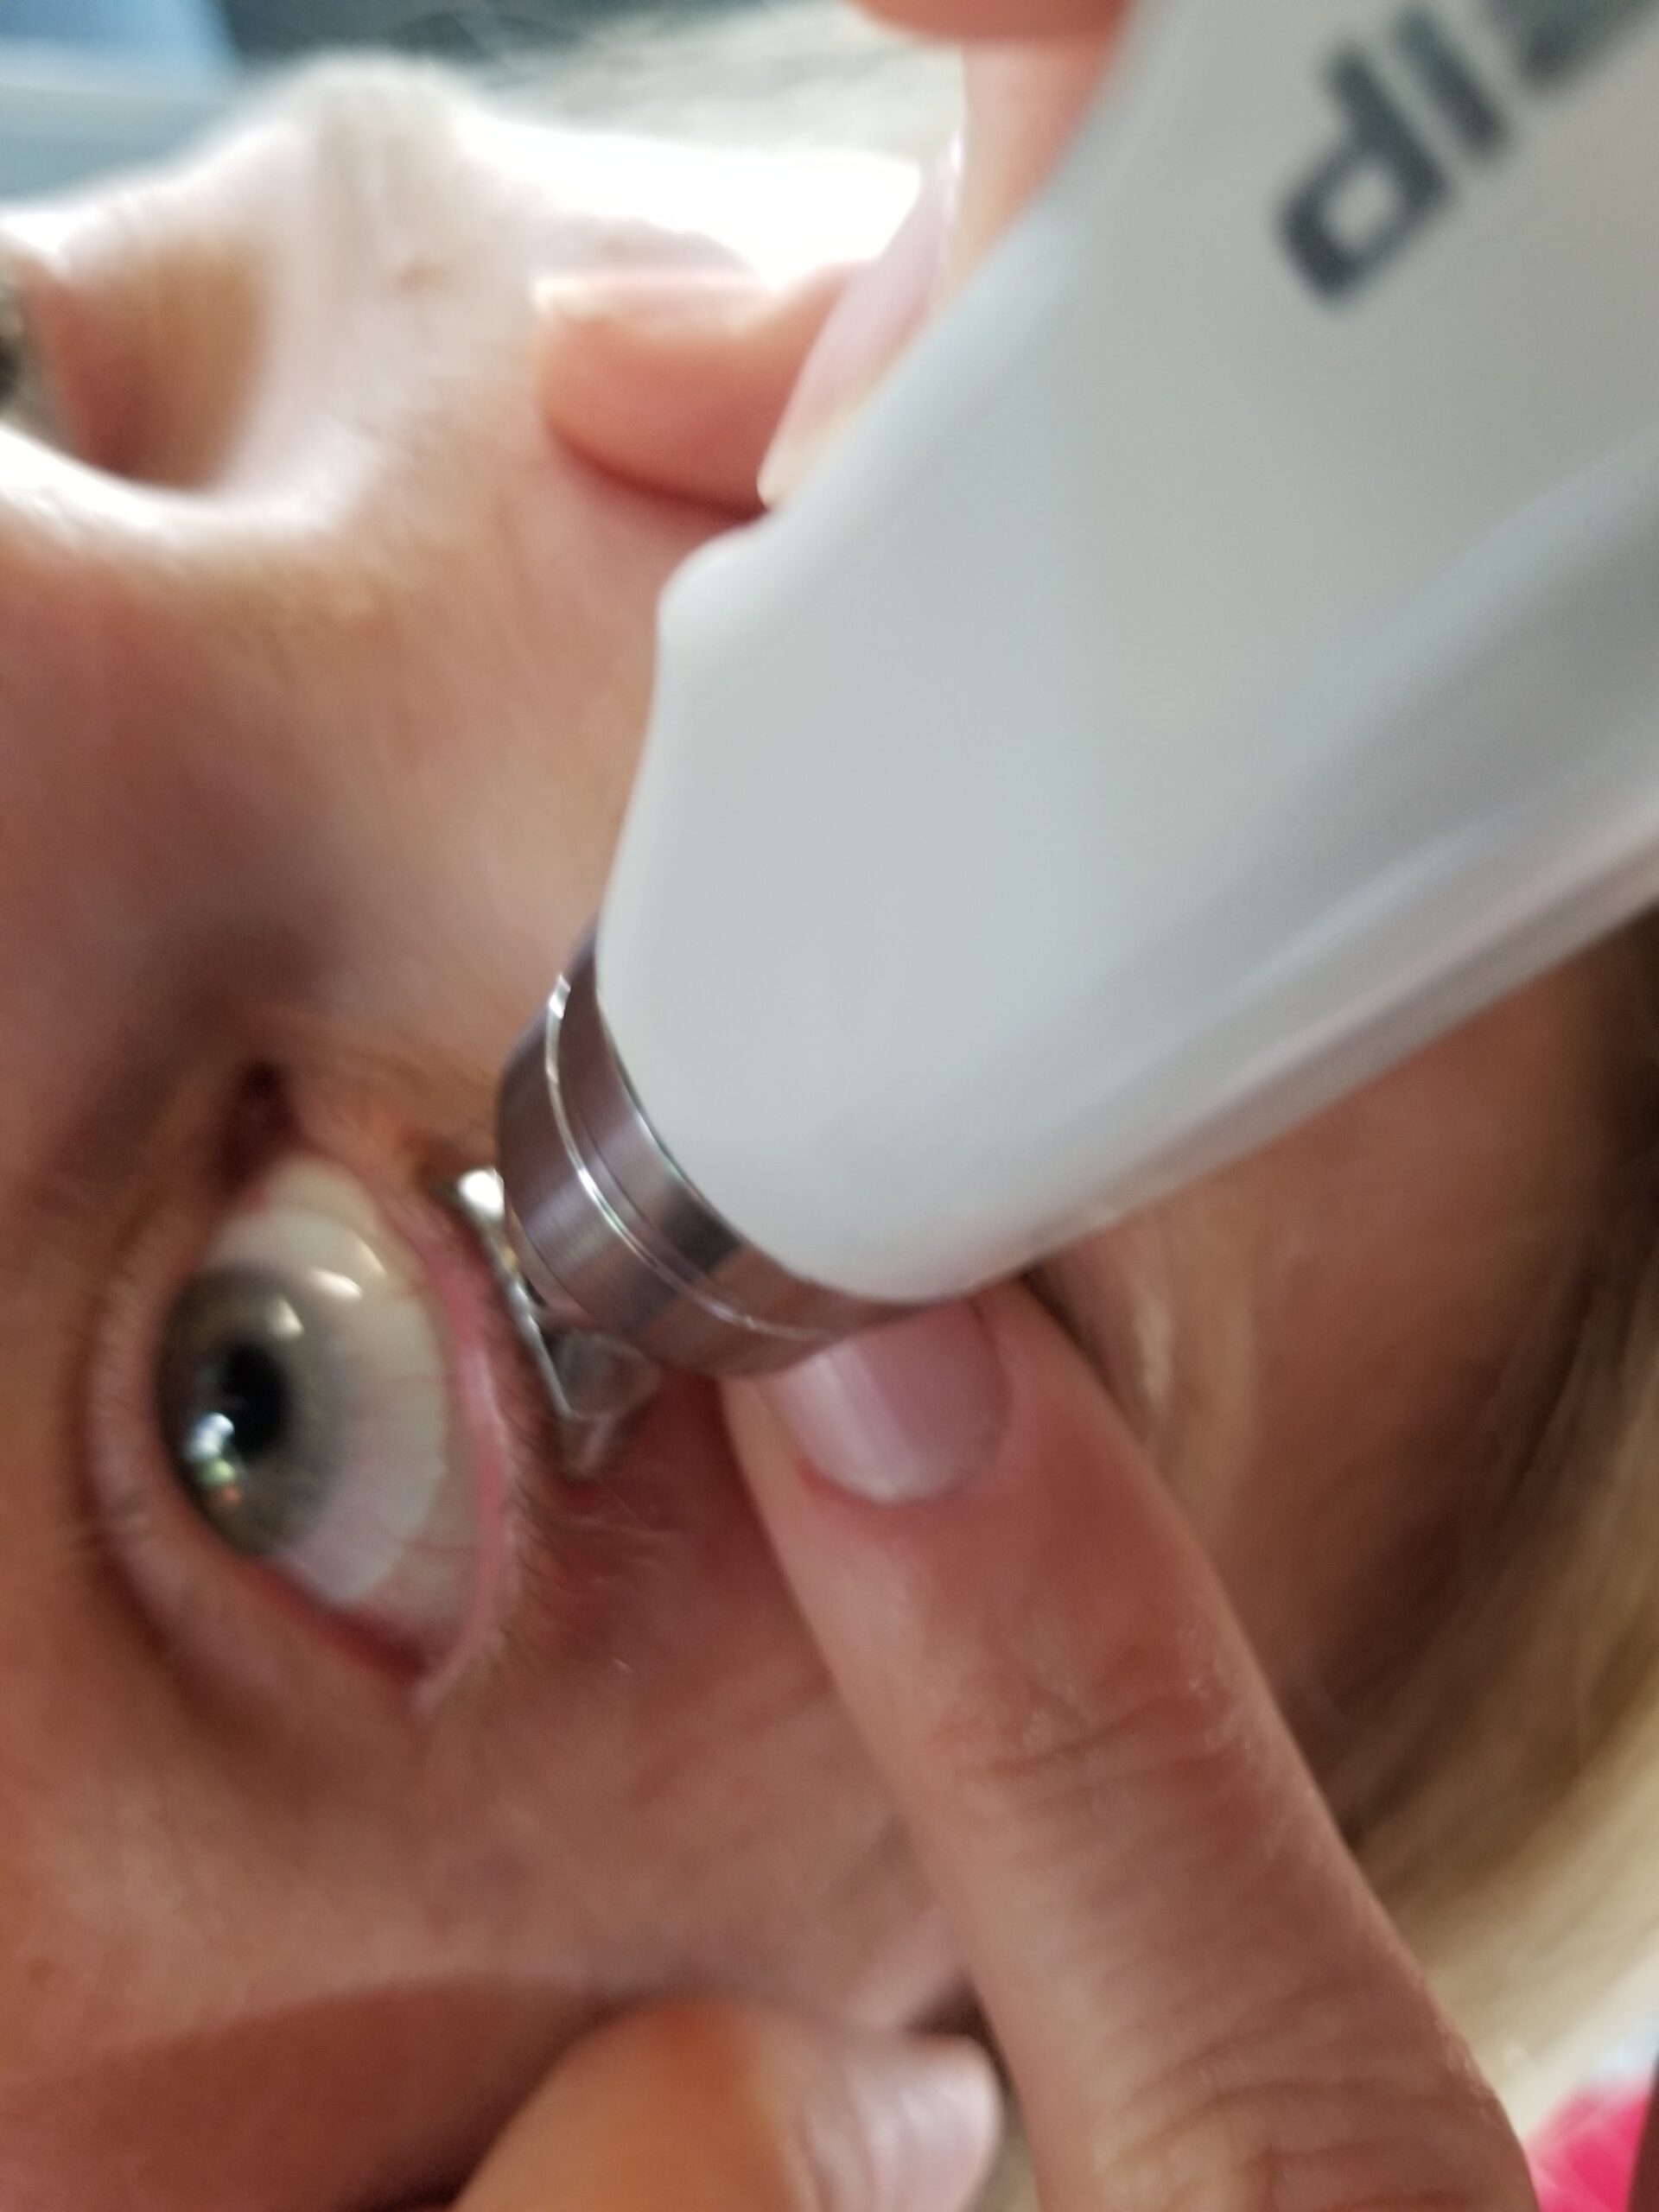 diaton tonometer used on the eye with scleral lenses to measure intraocular pressure